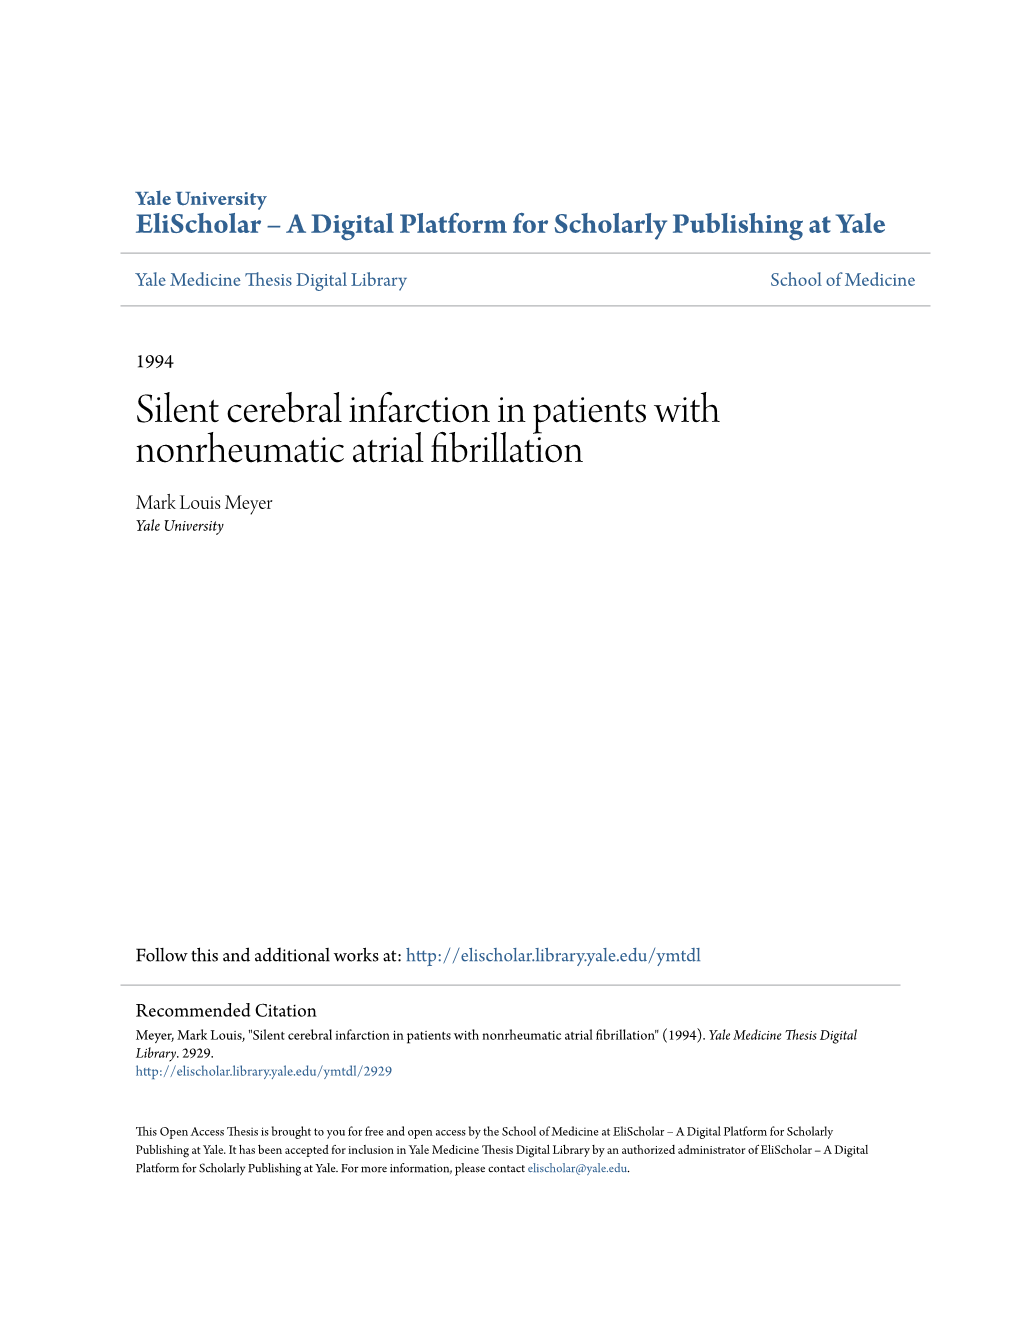 Silent Cerebral Infarction in Patients with Nonrheumatic Atrial Fibrillation Mark Louis Meyer Yale University